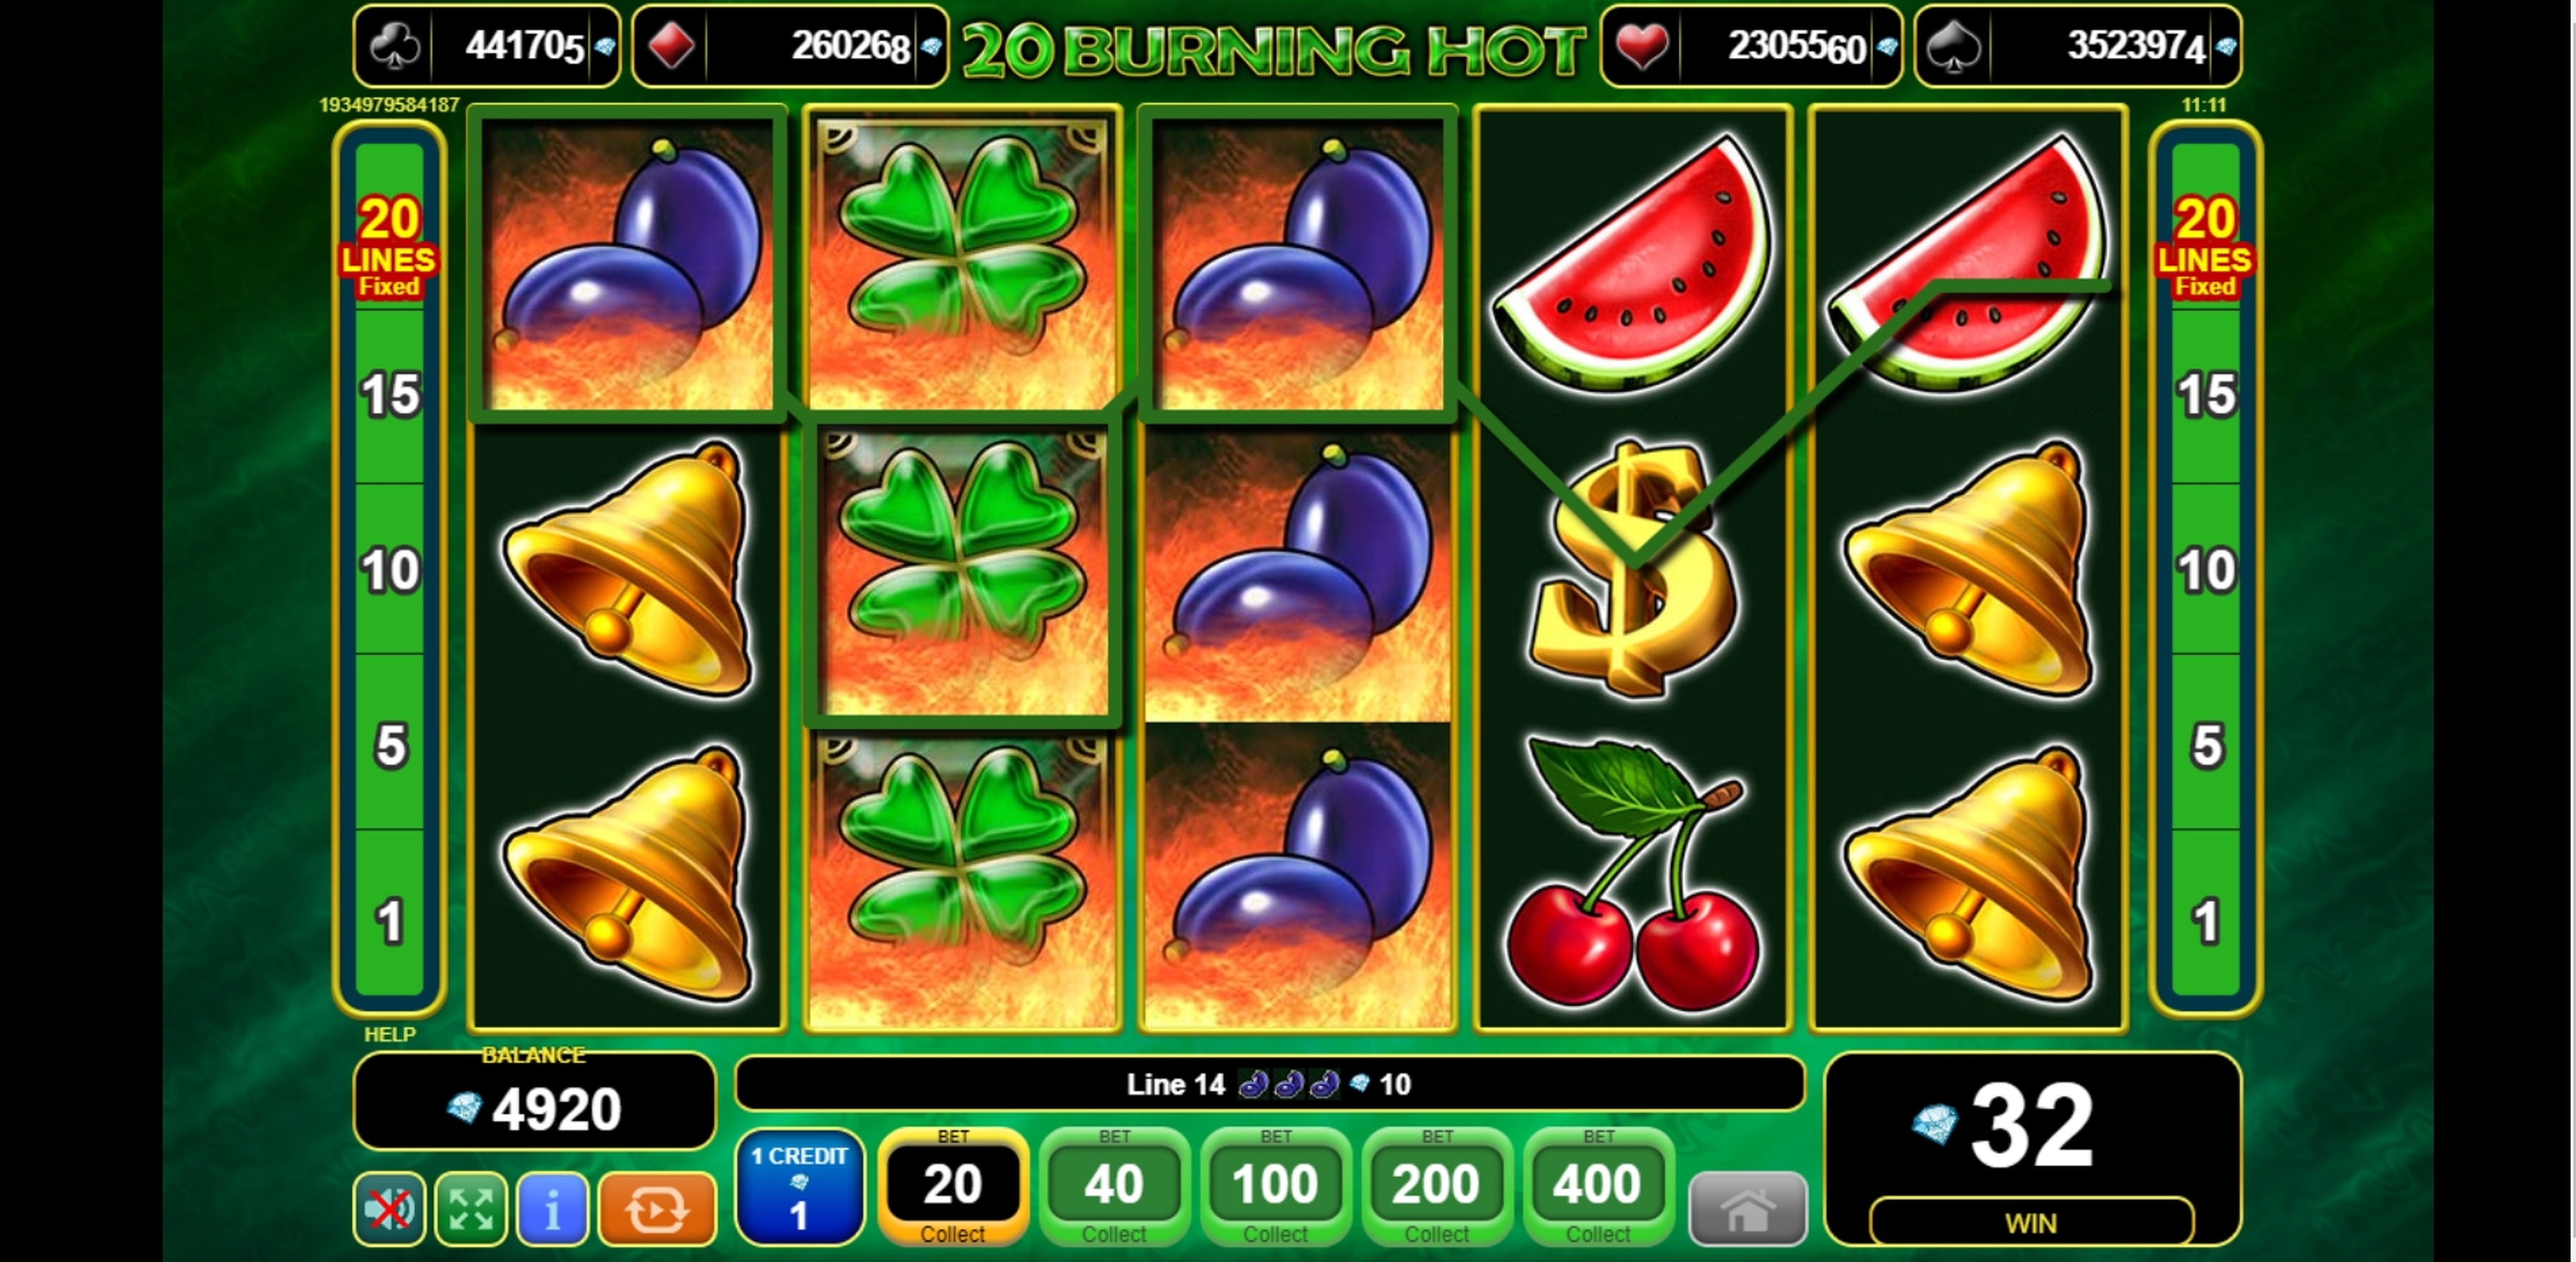 Win Money in 20 Burning Hot Free Slot Game by EGT